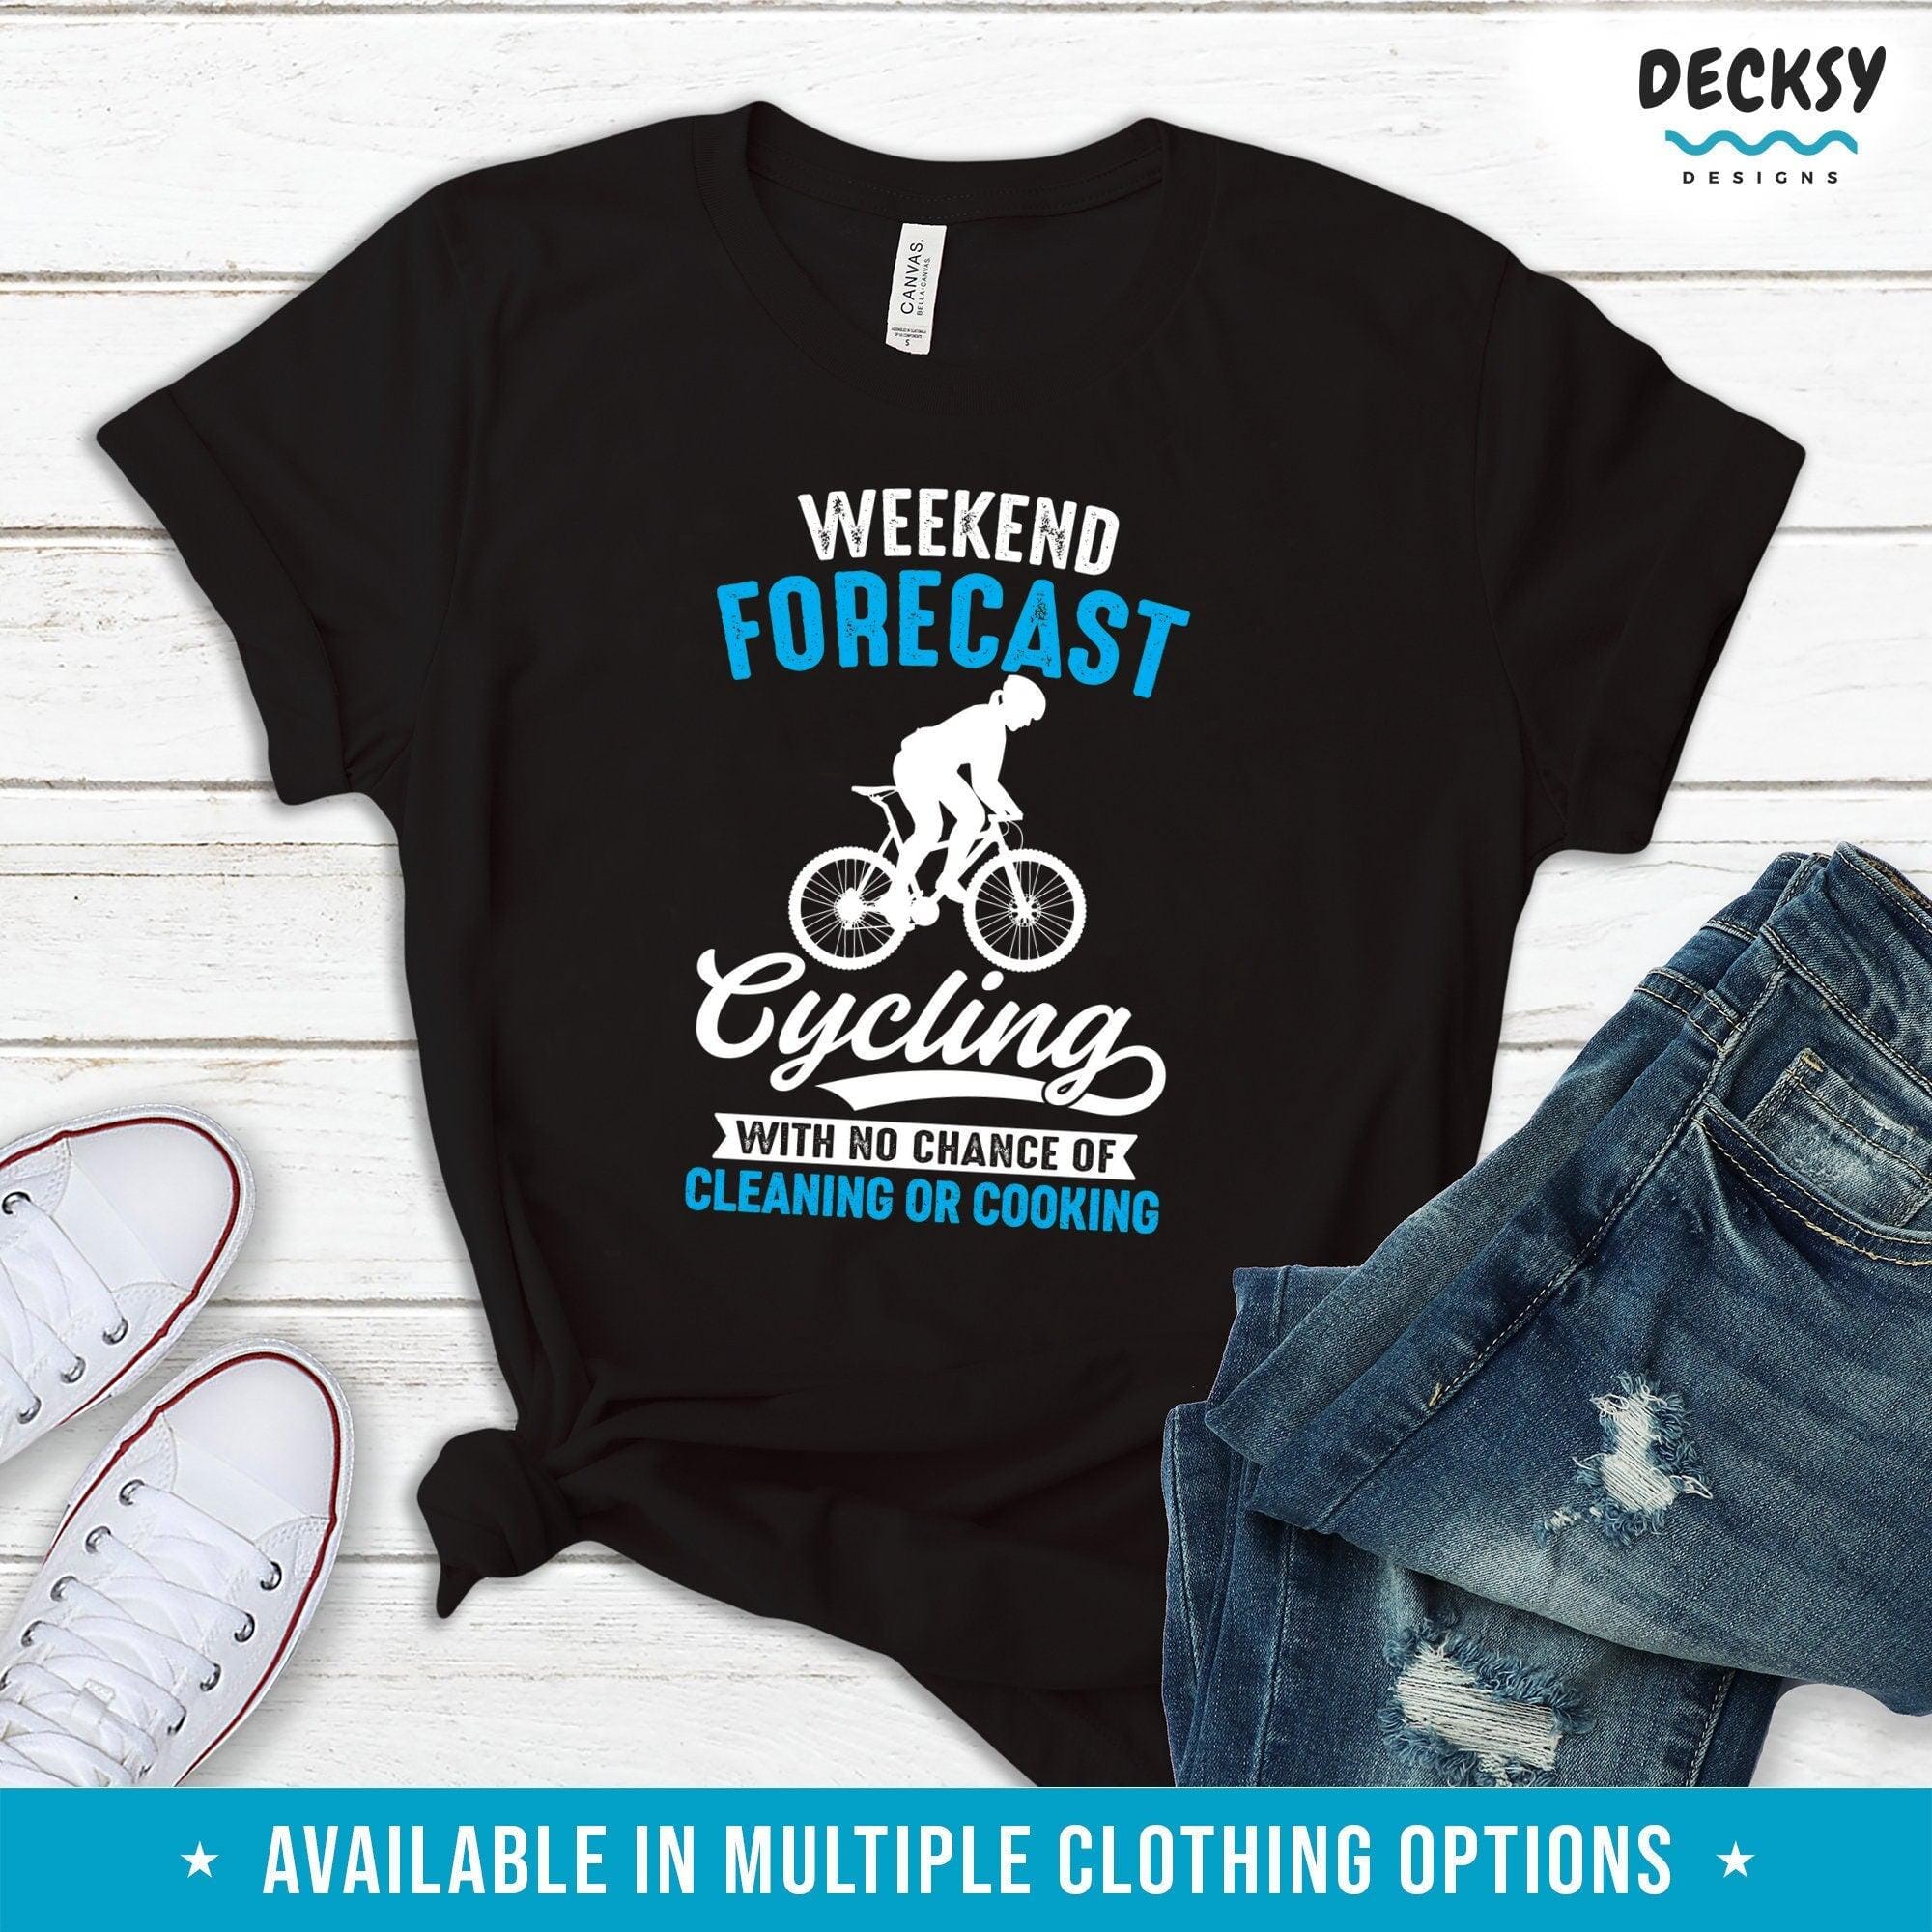 Cycling Shirt, Gift For Cyclists-Clothing:Gender-Neutral Adult Clothing:Tops & Tees:T-shirts:Graphic Tees-DecksyDesigns